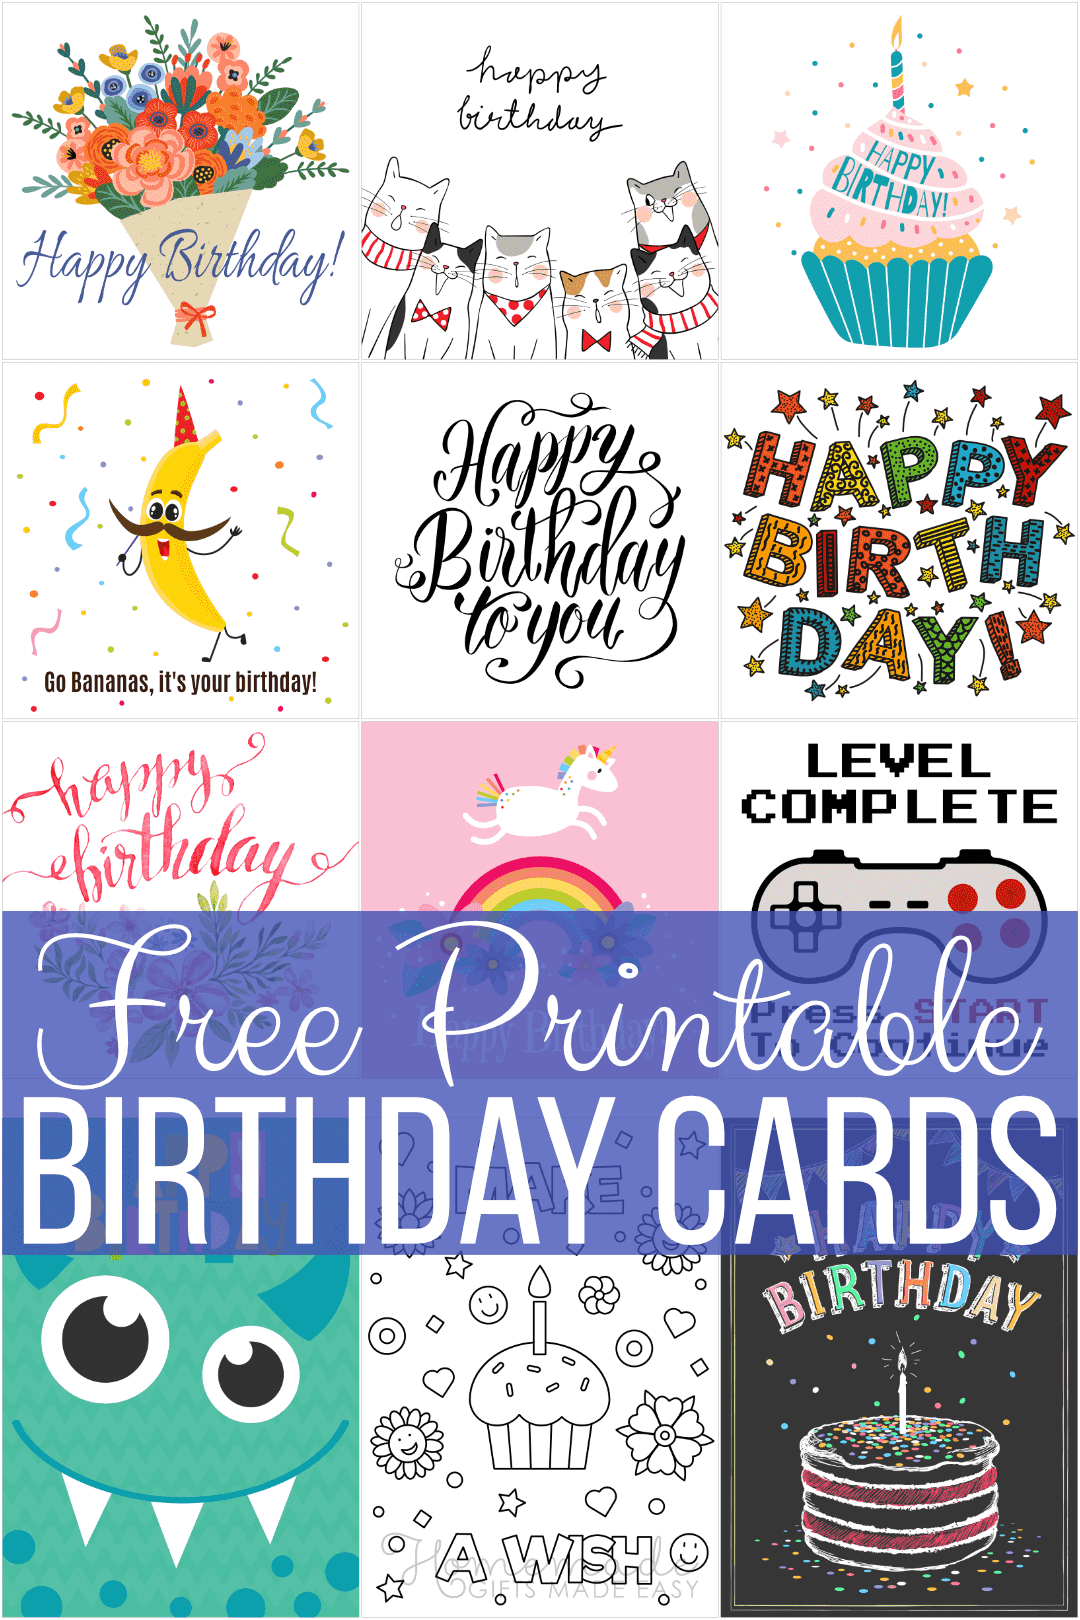 Free Printable Birthday Cards For Everyone - Free Online Printable Childrens Birthday Cards